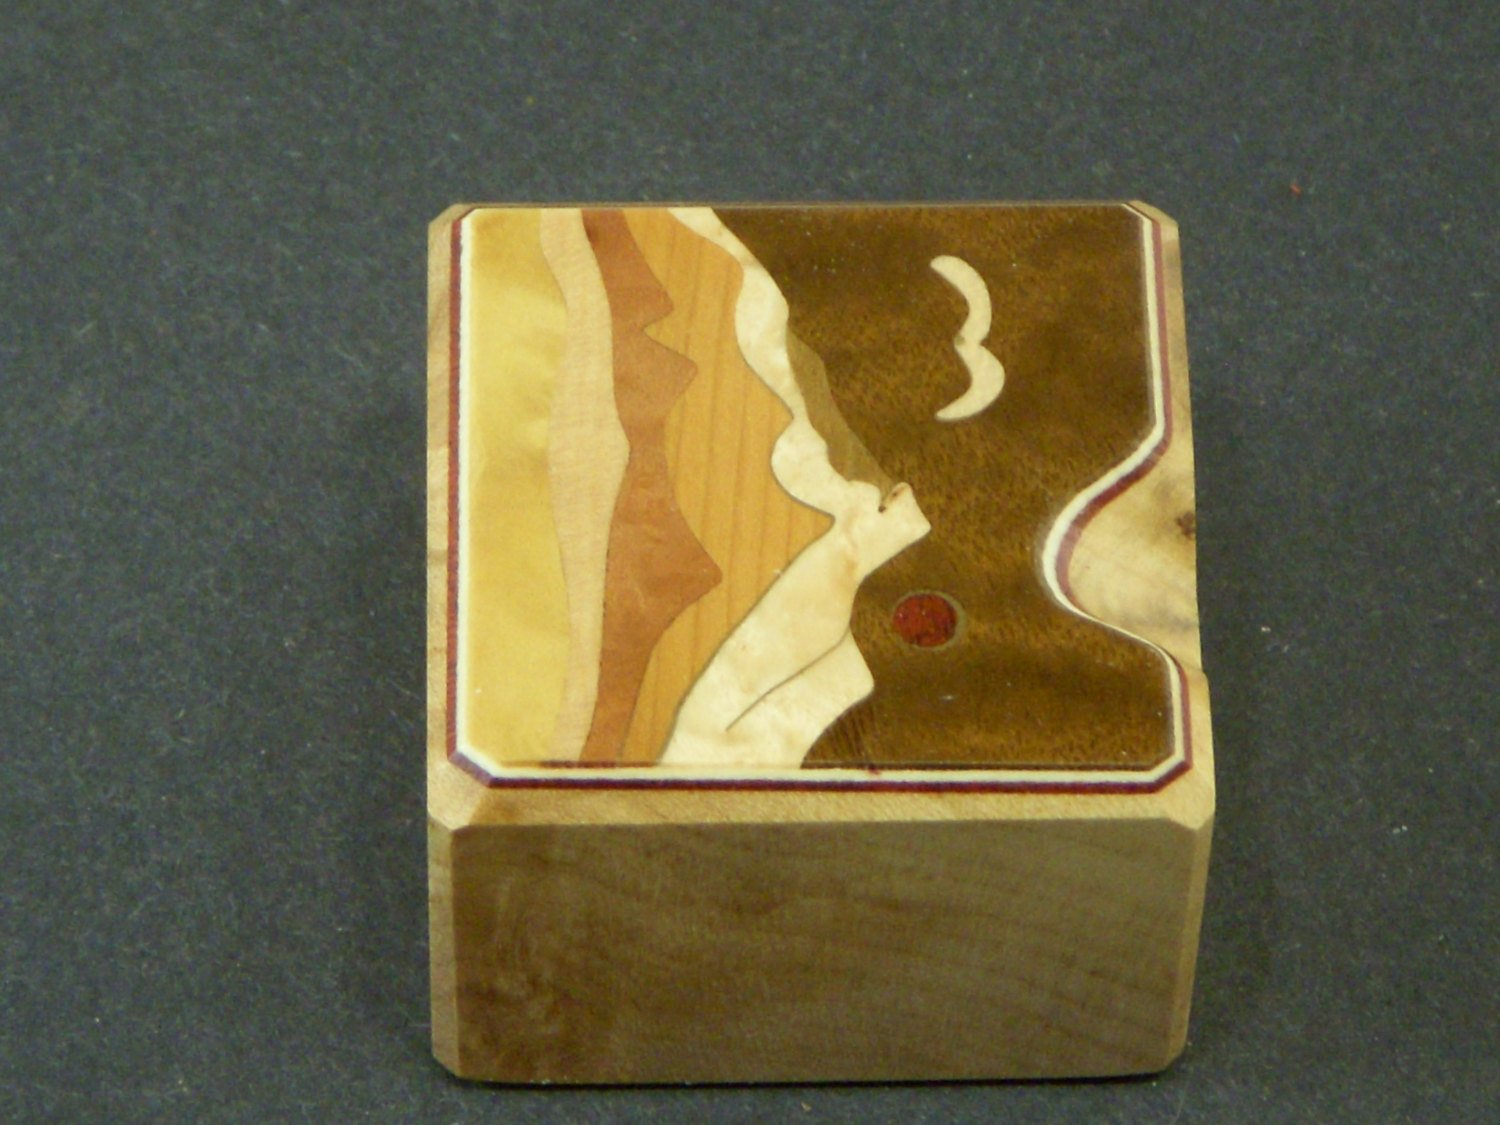 Paperweight, Retirement Gift, Colleague Gift, office Paperweight, Wood Inlay Handmade in USA